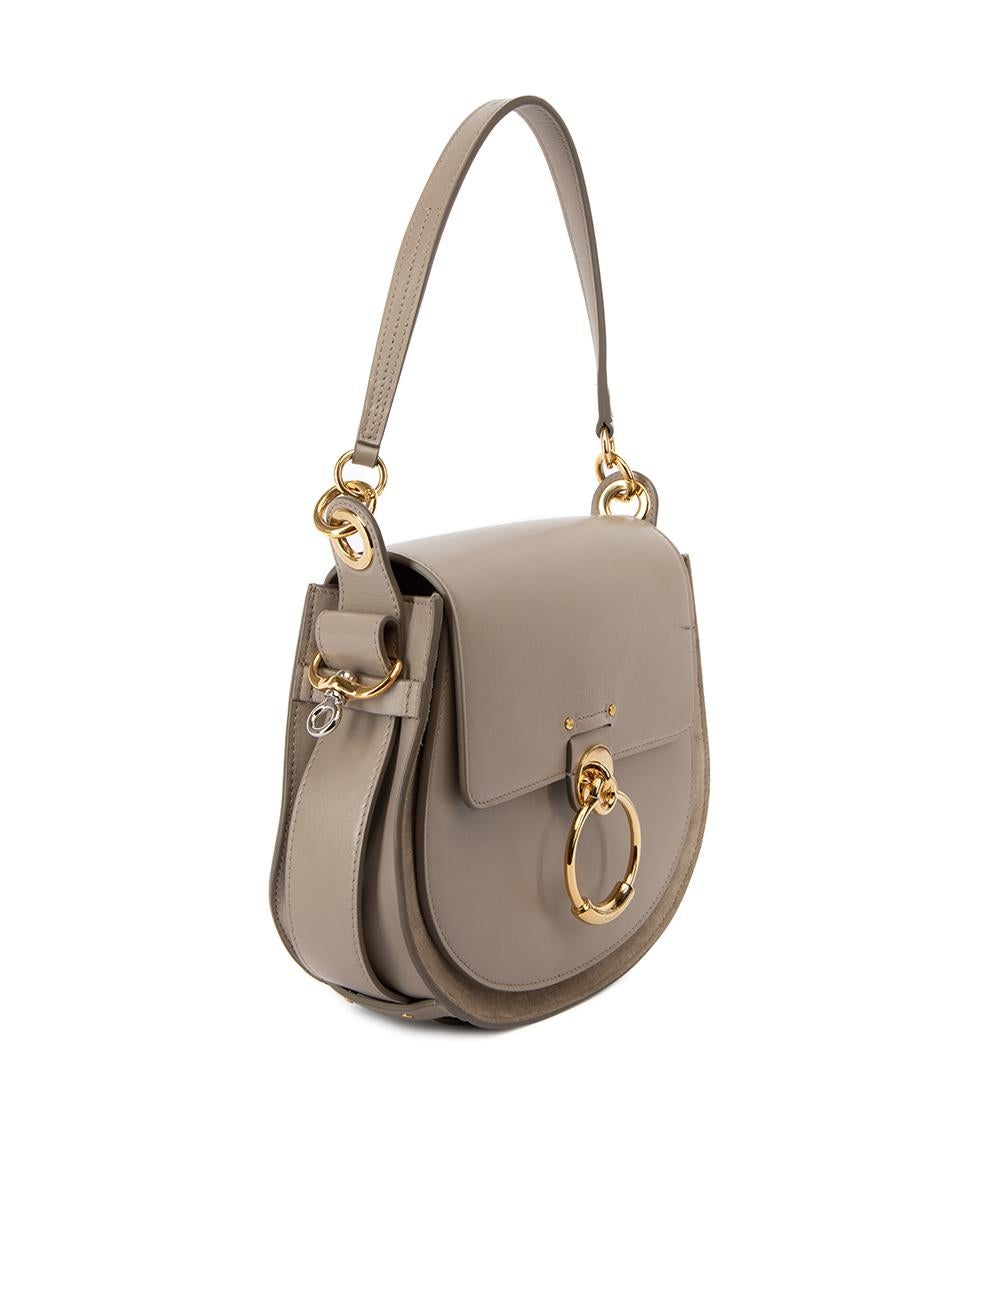 CONDITION is Very good. Minimal wear to bag is evident. Minimal wear to the leather exterior and scratches and there are dark marks on the bag flap of this used Chloé designer resale item. Details Beige Leather Medium crossbody bag 1x Handle 1x